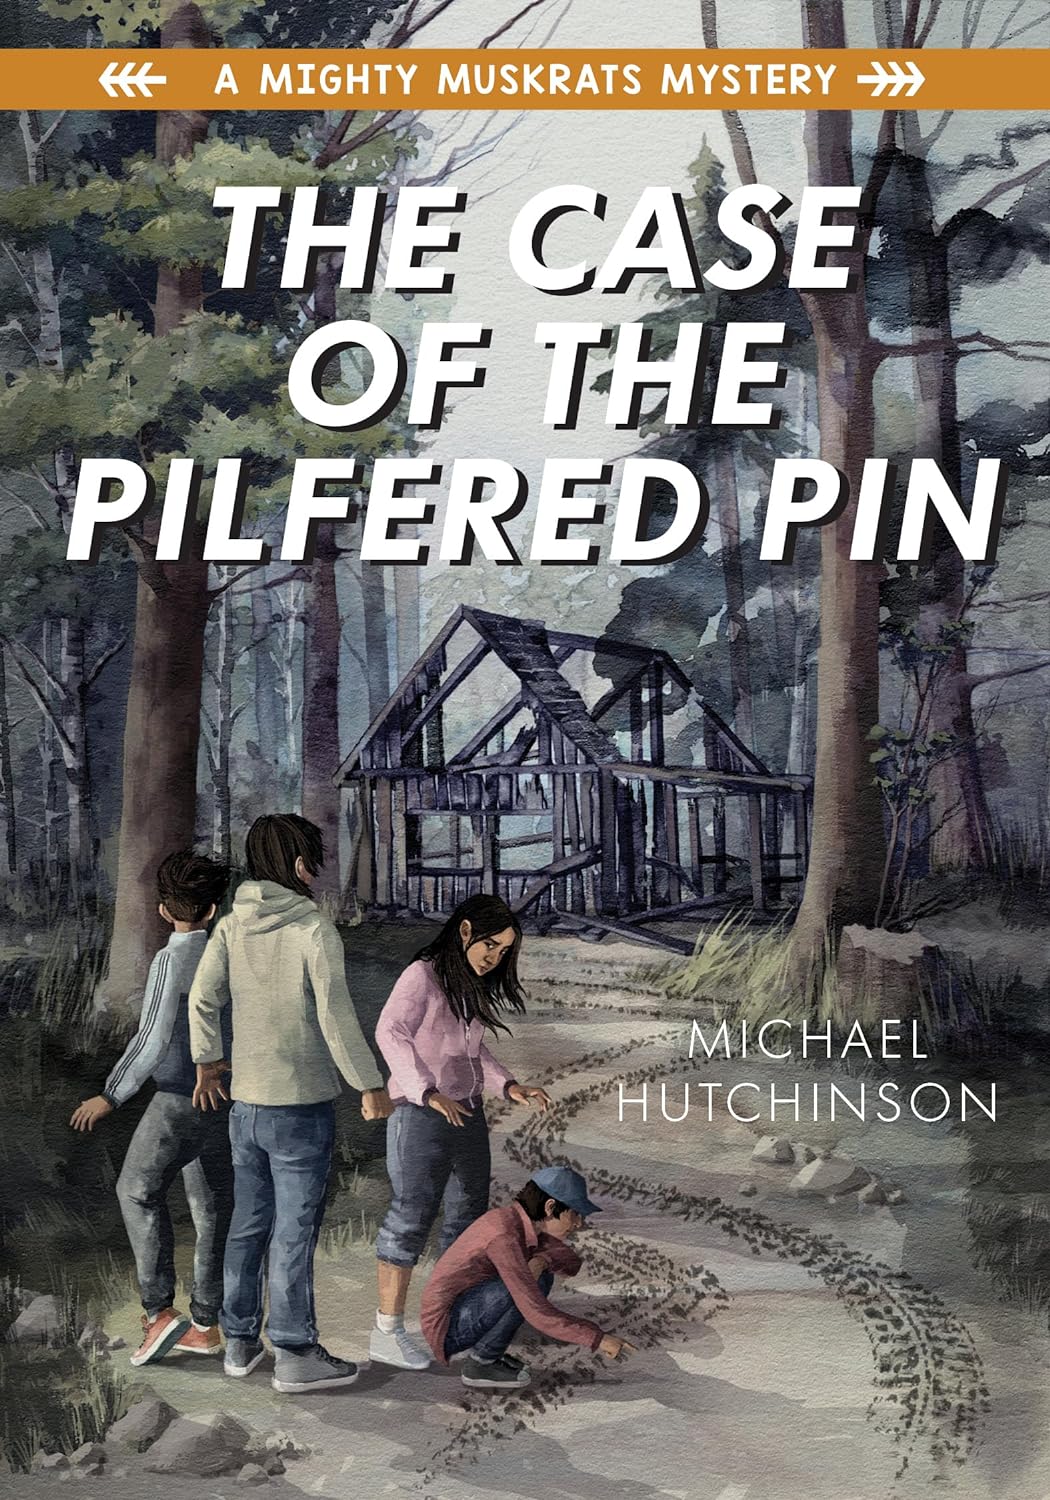 The Case of the Pilfered Pin (Mighty Muskrats Mystery) by Michael Hutchinson